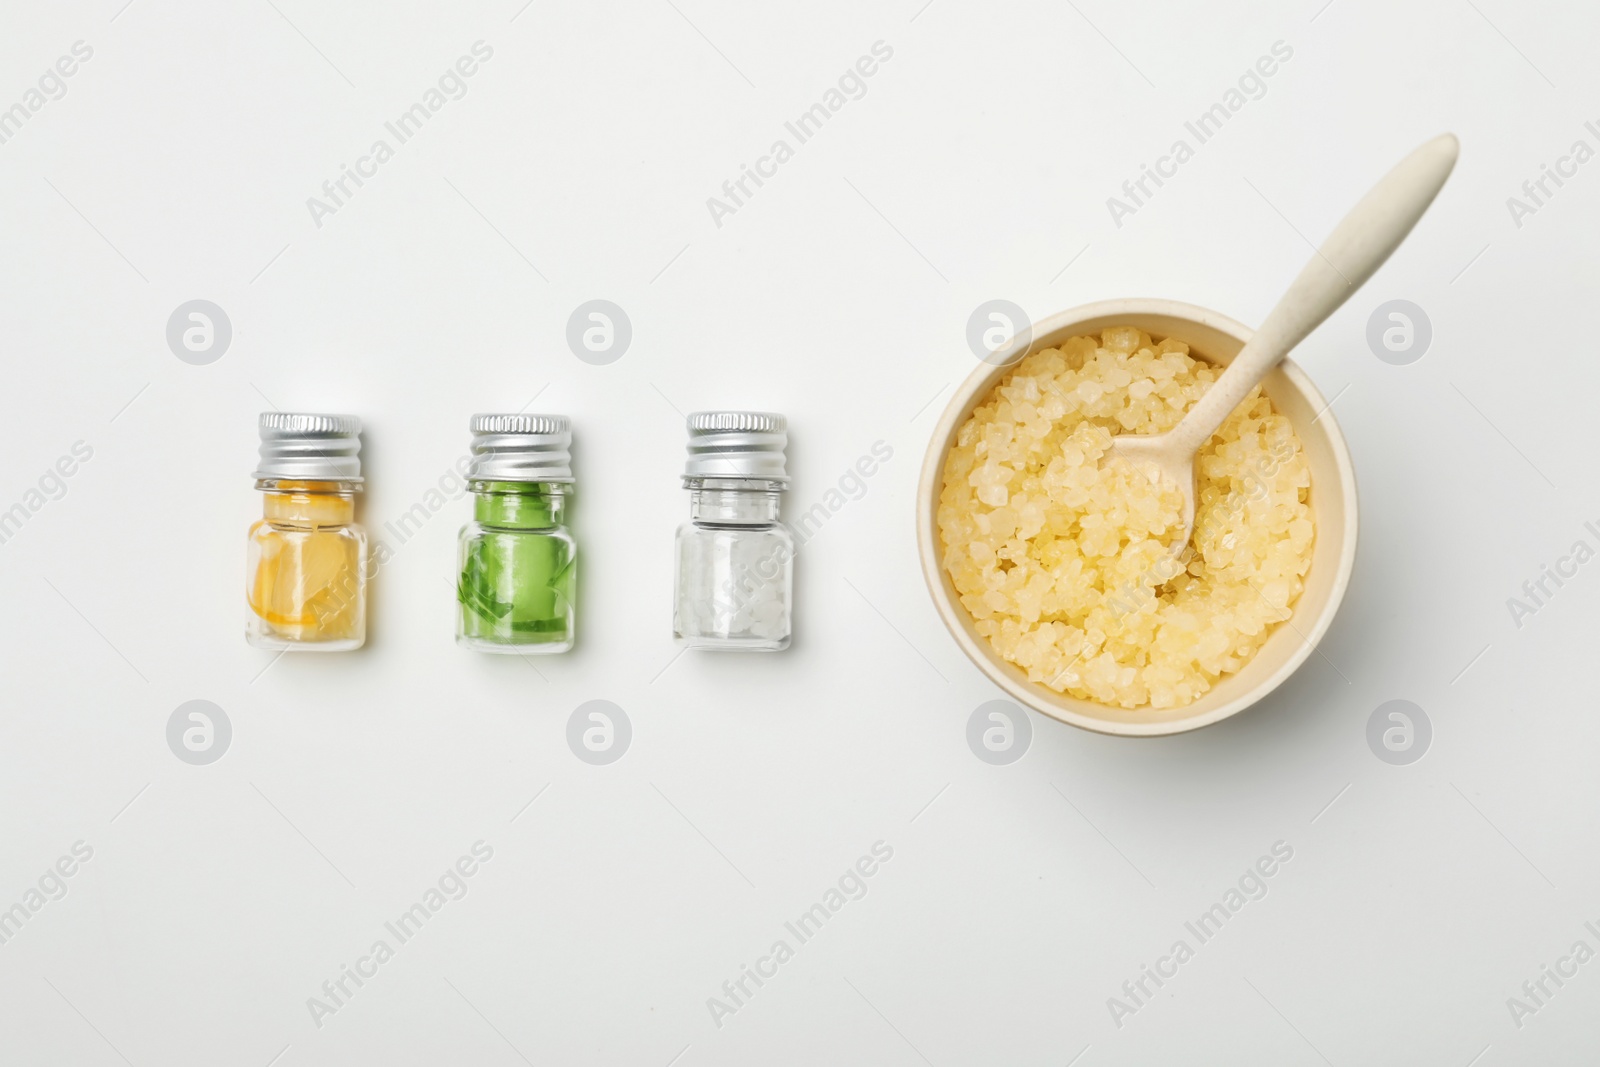 Photo of Homemade effective acne remedy and ingredients on white background